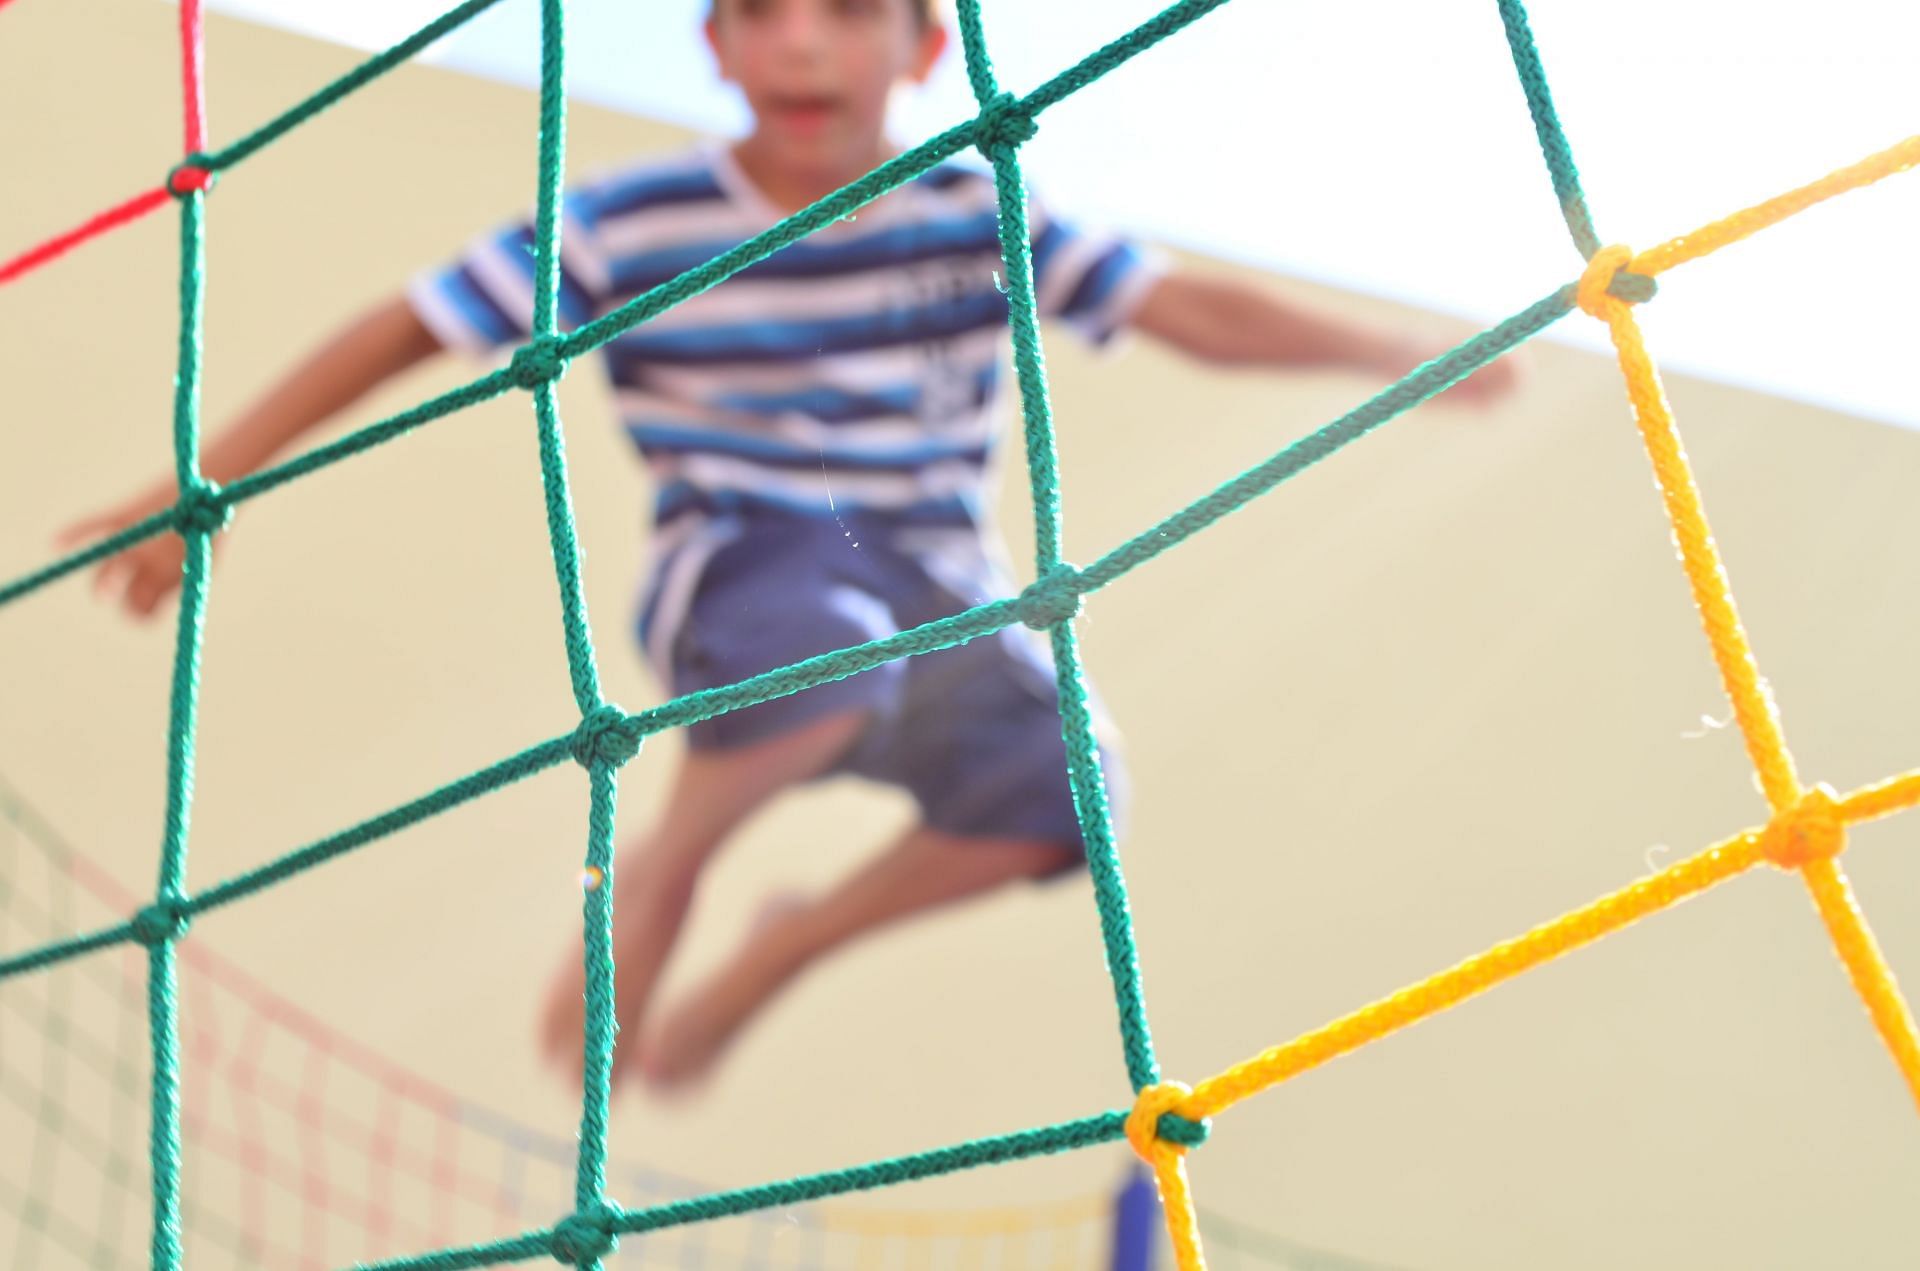 Is jumping on trampoline a good exercise? - Yes it is fun. (Image via Unsplash/Matheus Costa)